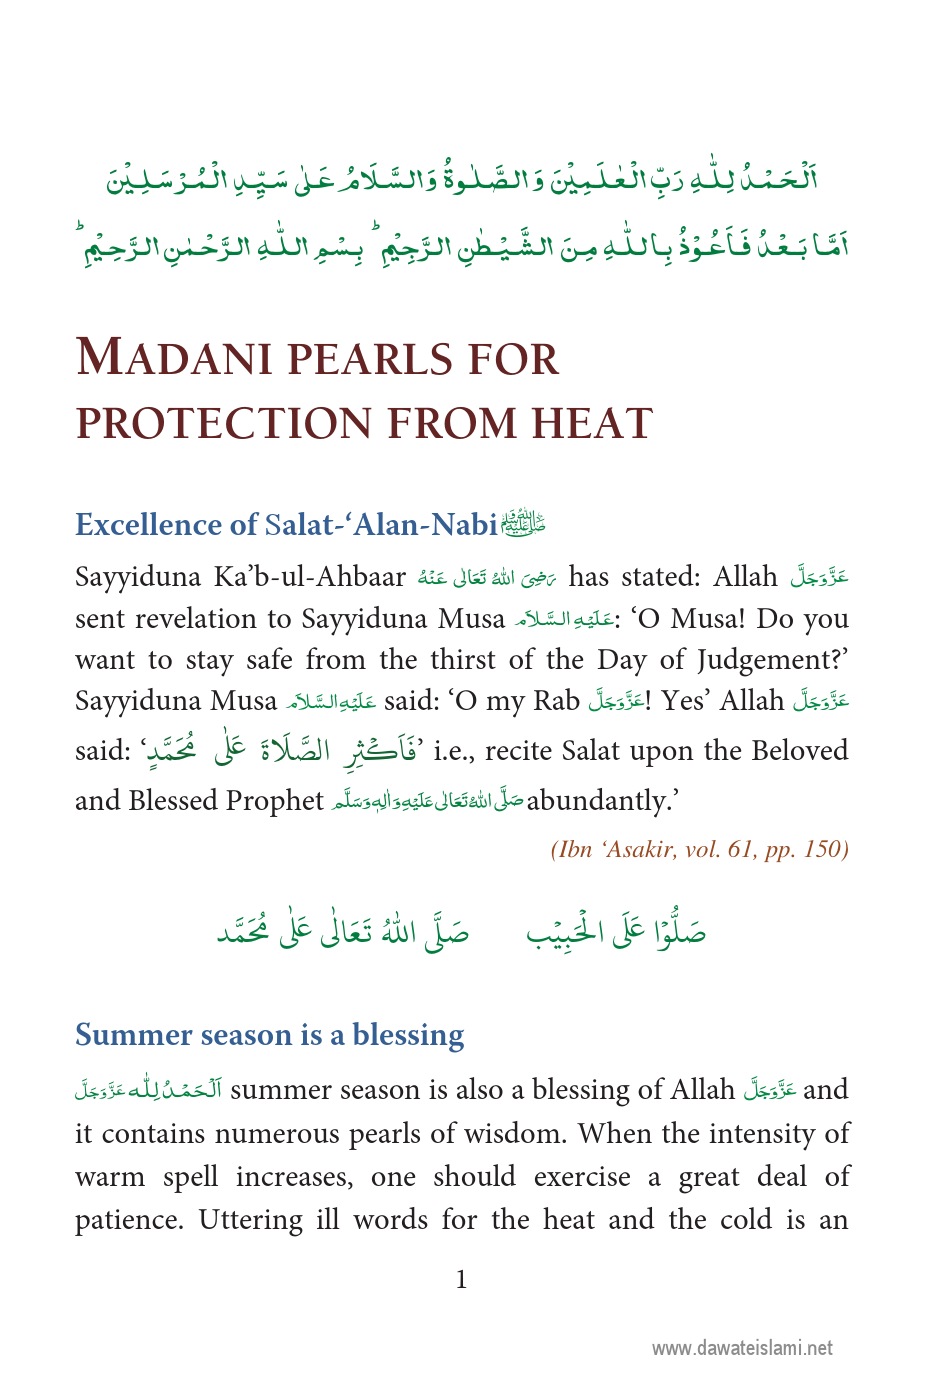 MadaniPearlsForProtectionFromHeat.pdf, 32- pages 